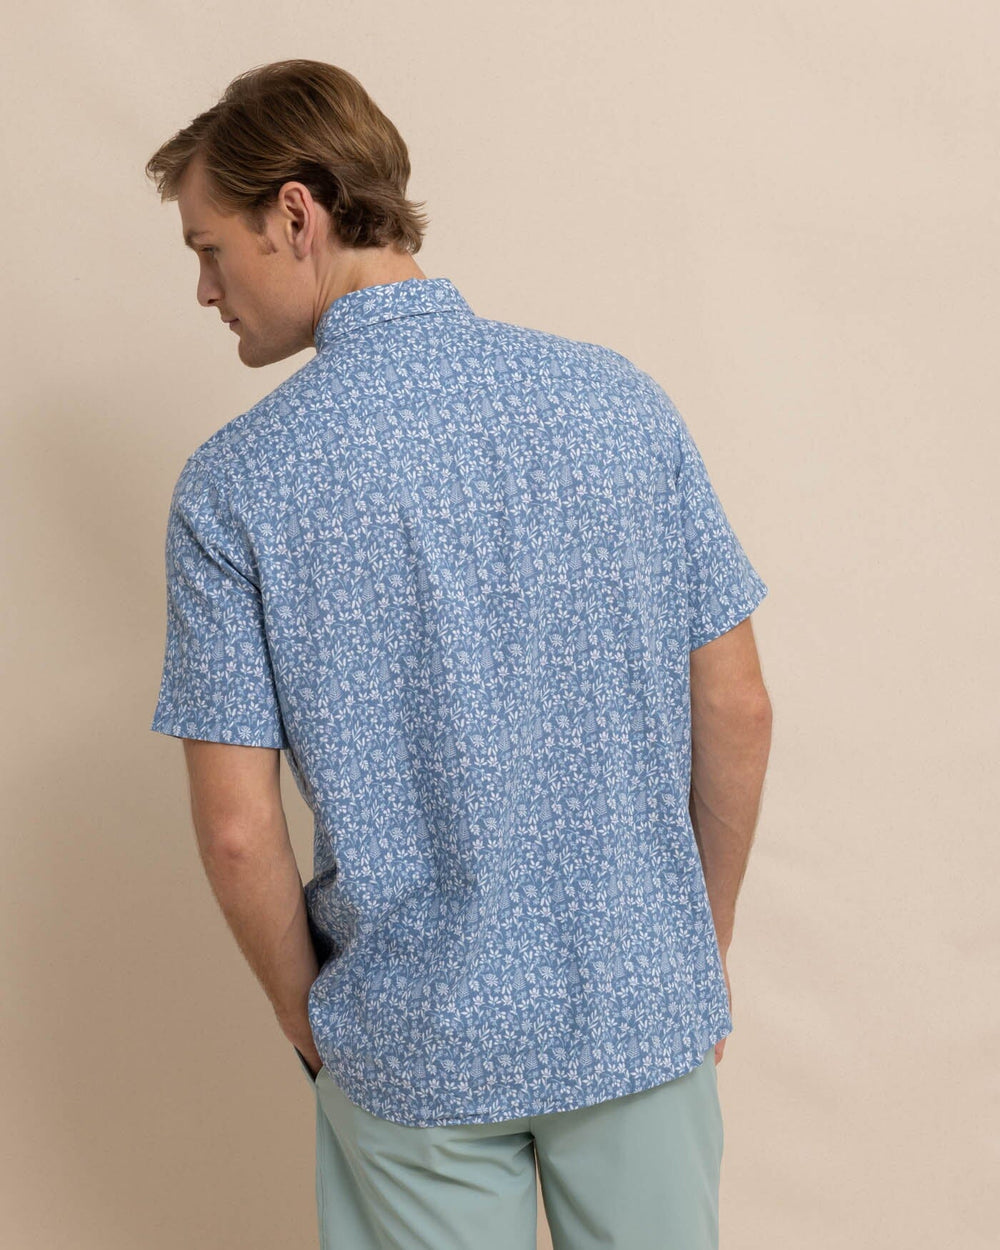 The back view of the Southern Tide Linen Rayon Ditzy Floral Short Sleeve Sport Shirt by Southern Tide - Coronet Blue